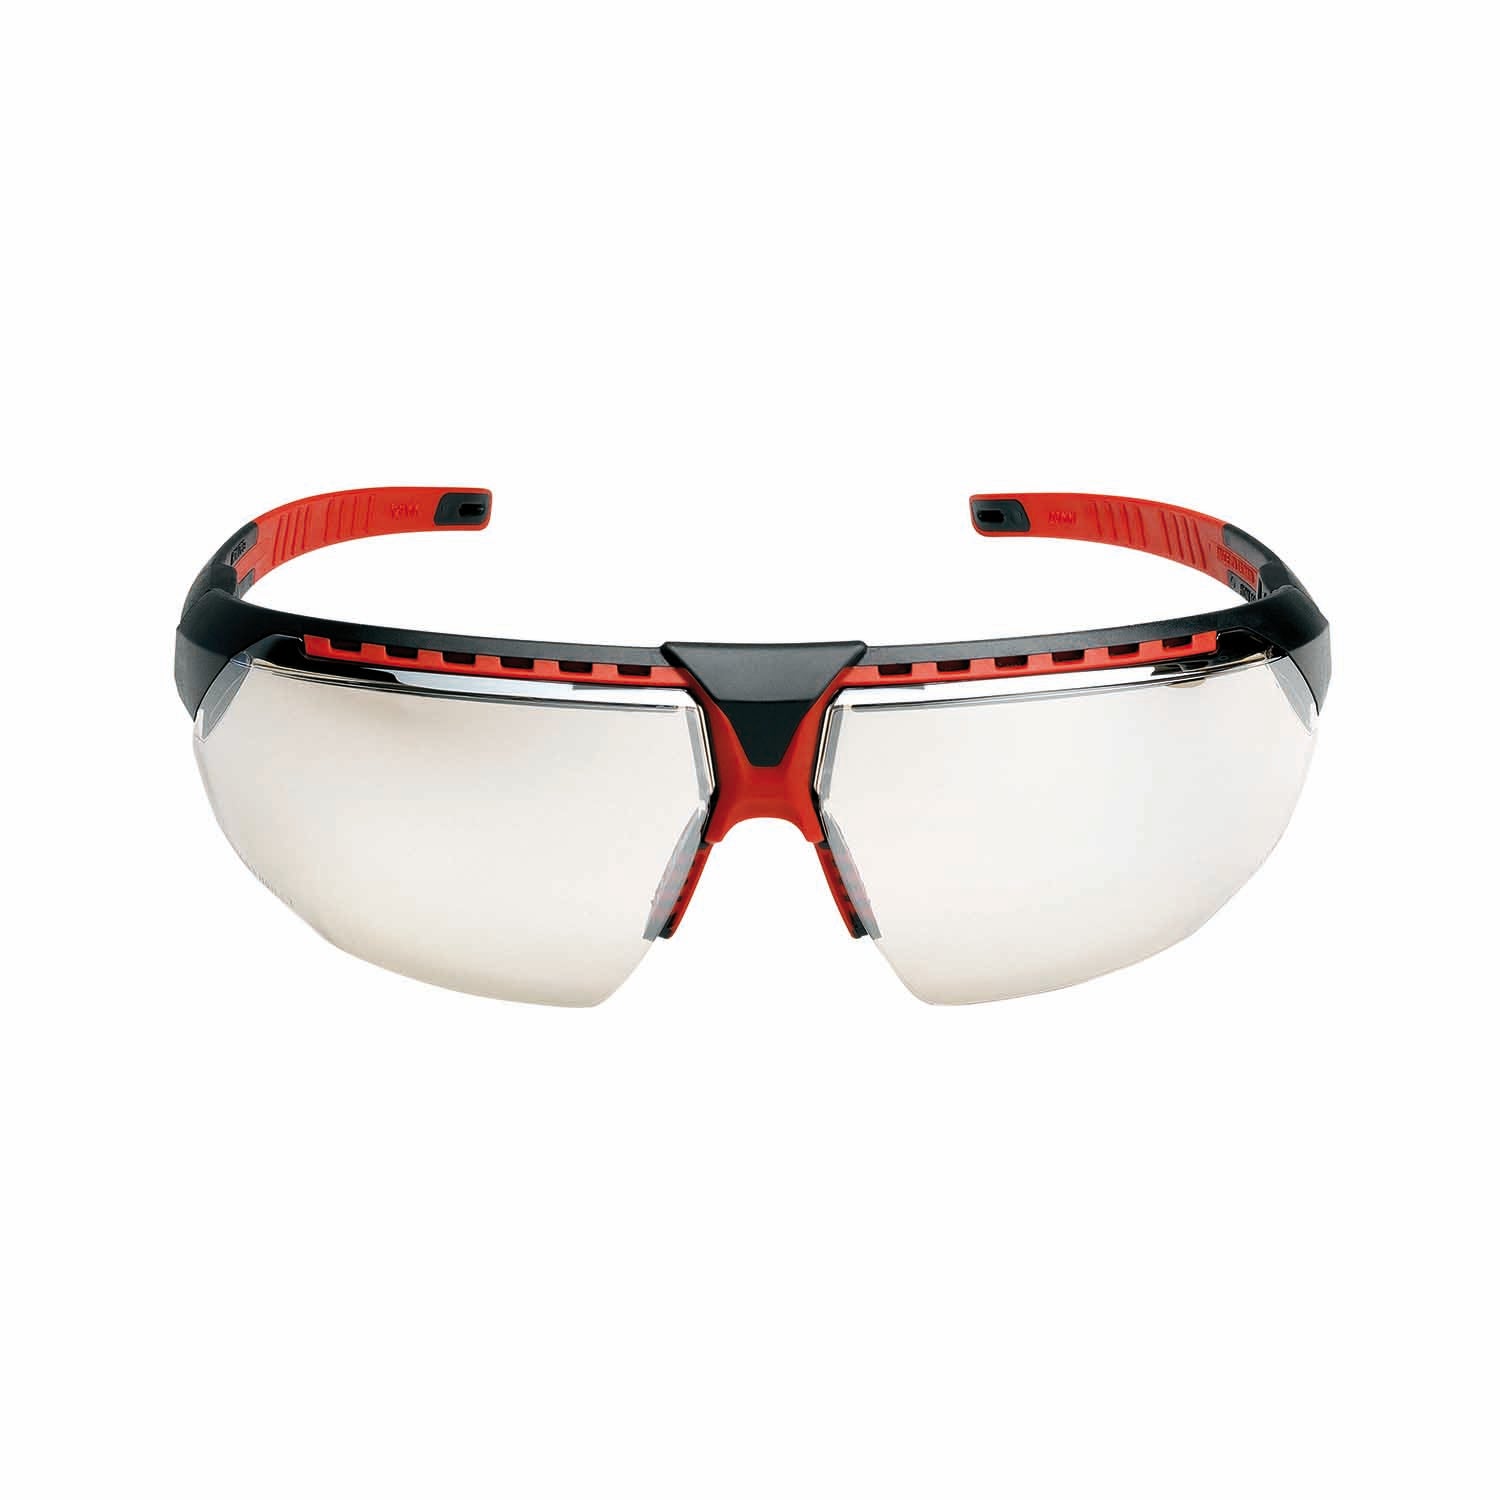 safety spectacles Honeywell 1034838 avatar safety glasses